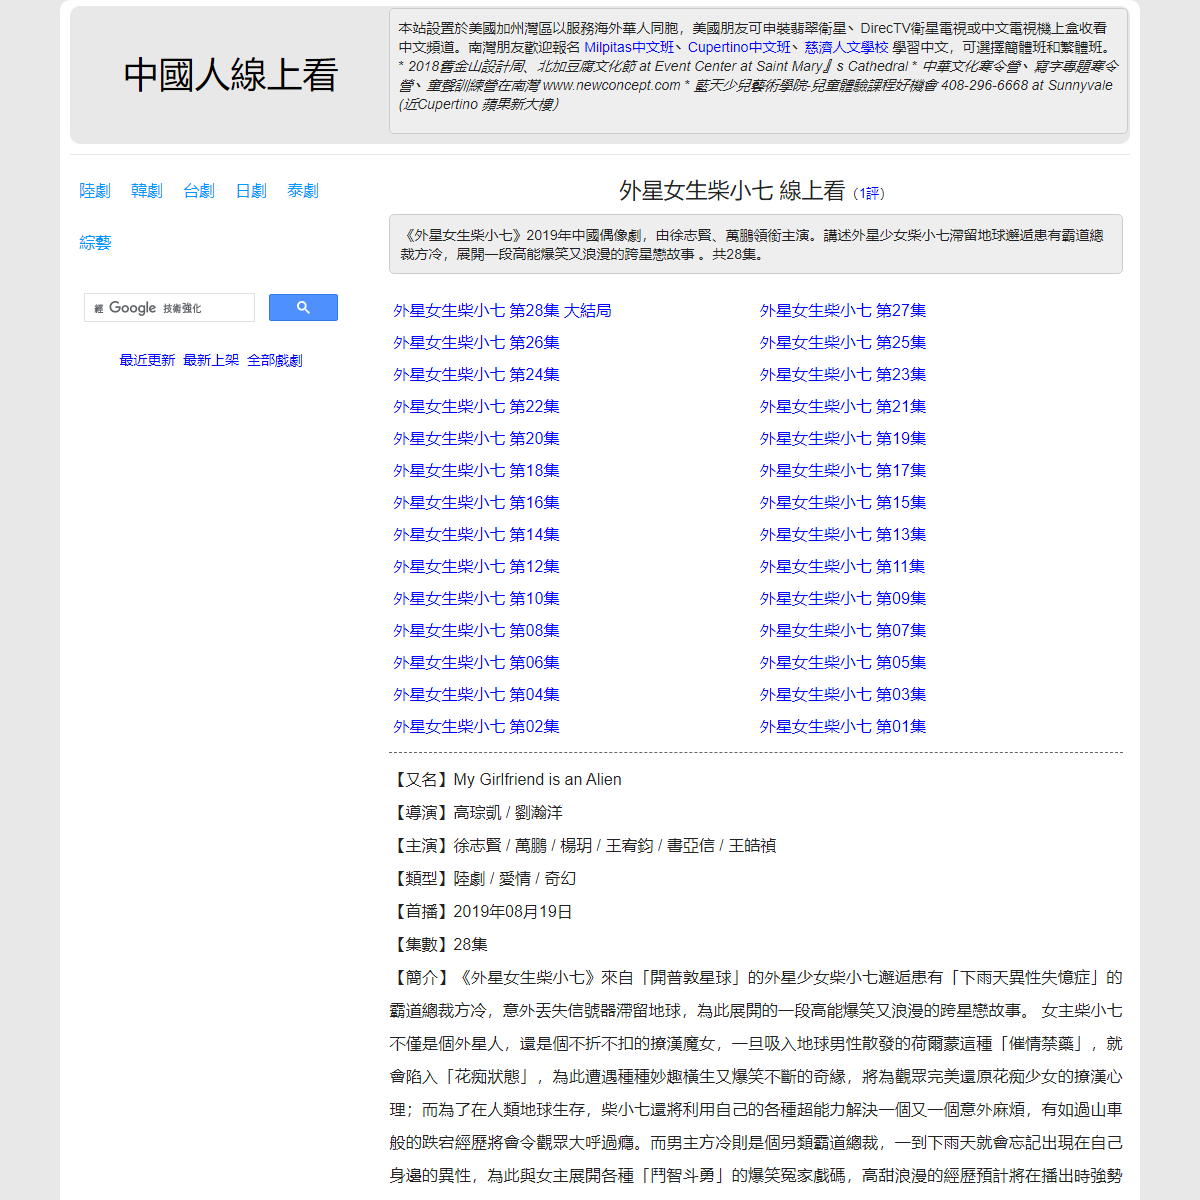 A complete backup of https://chinaq.tv/cn190819/